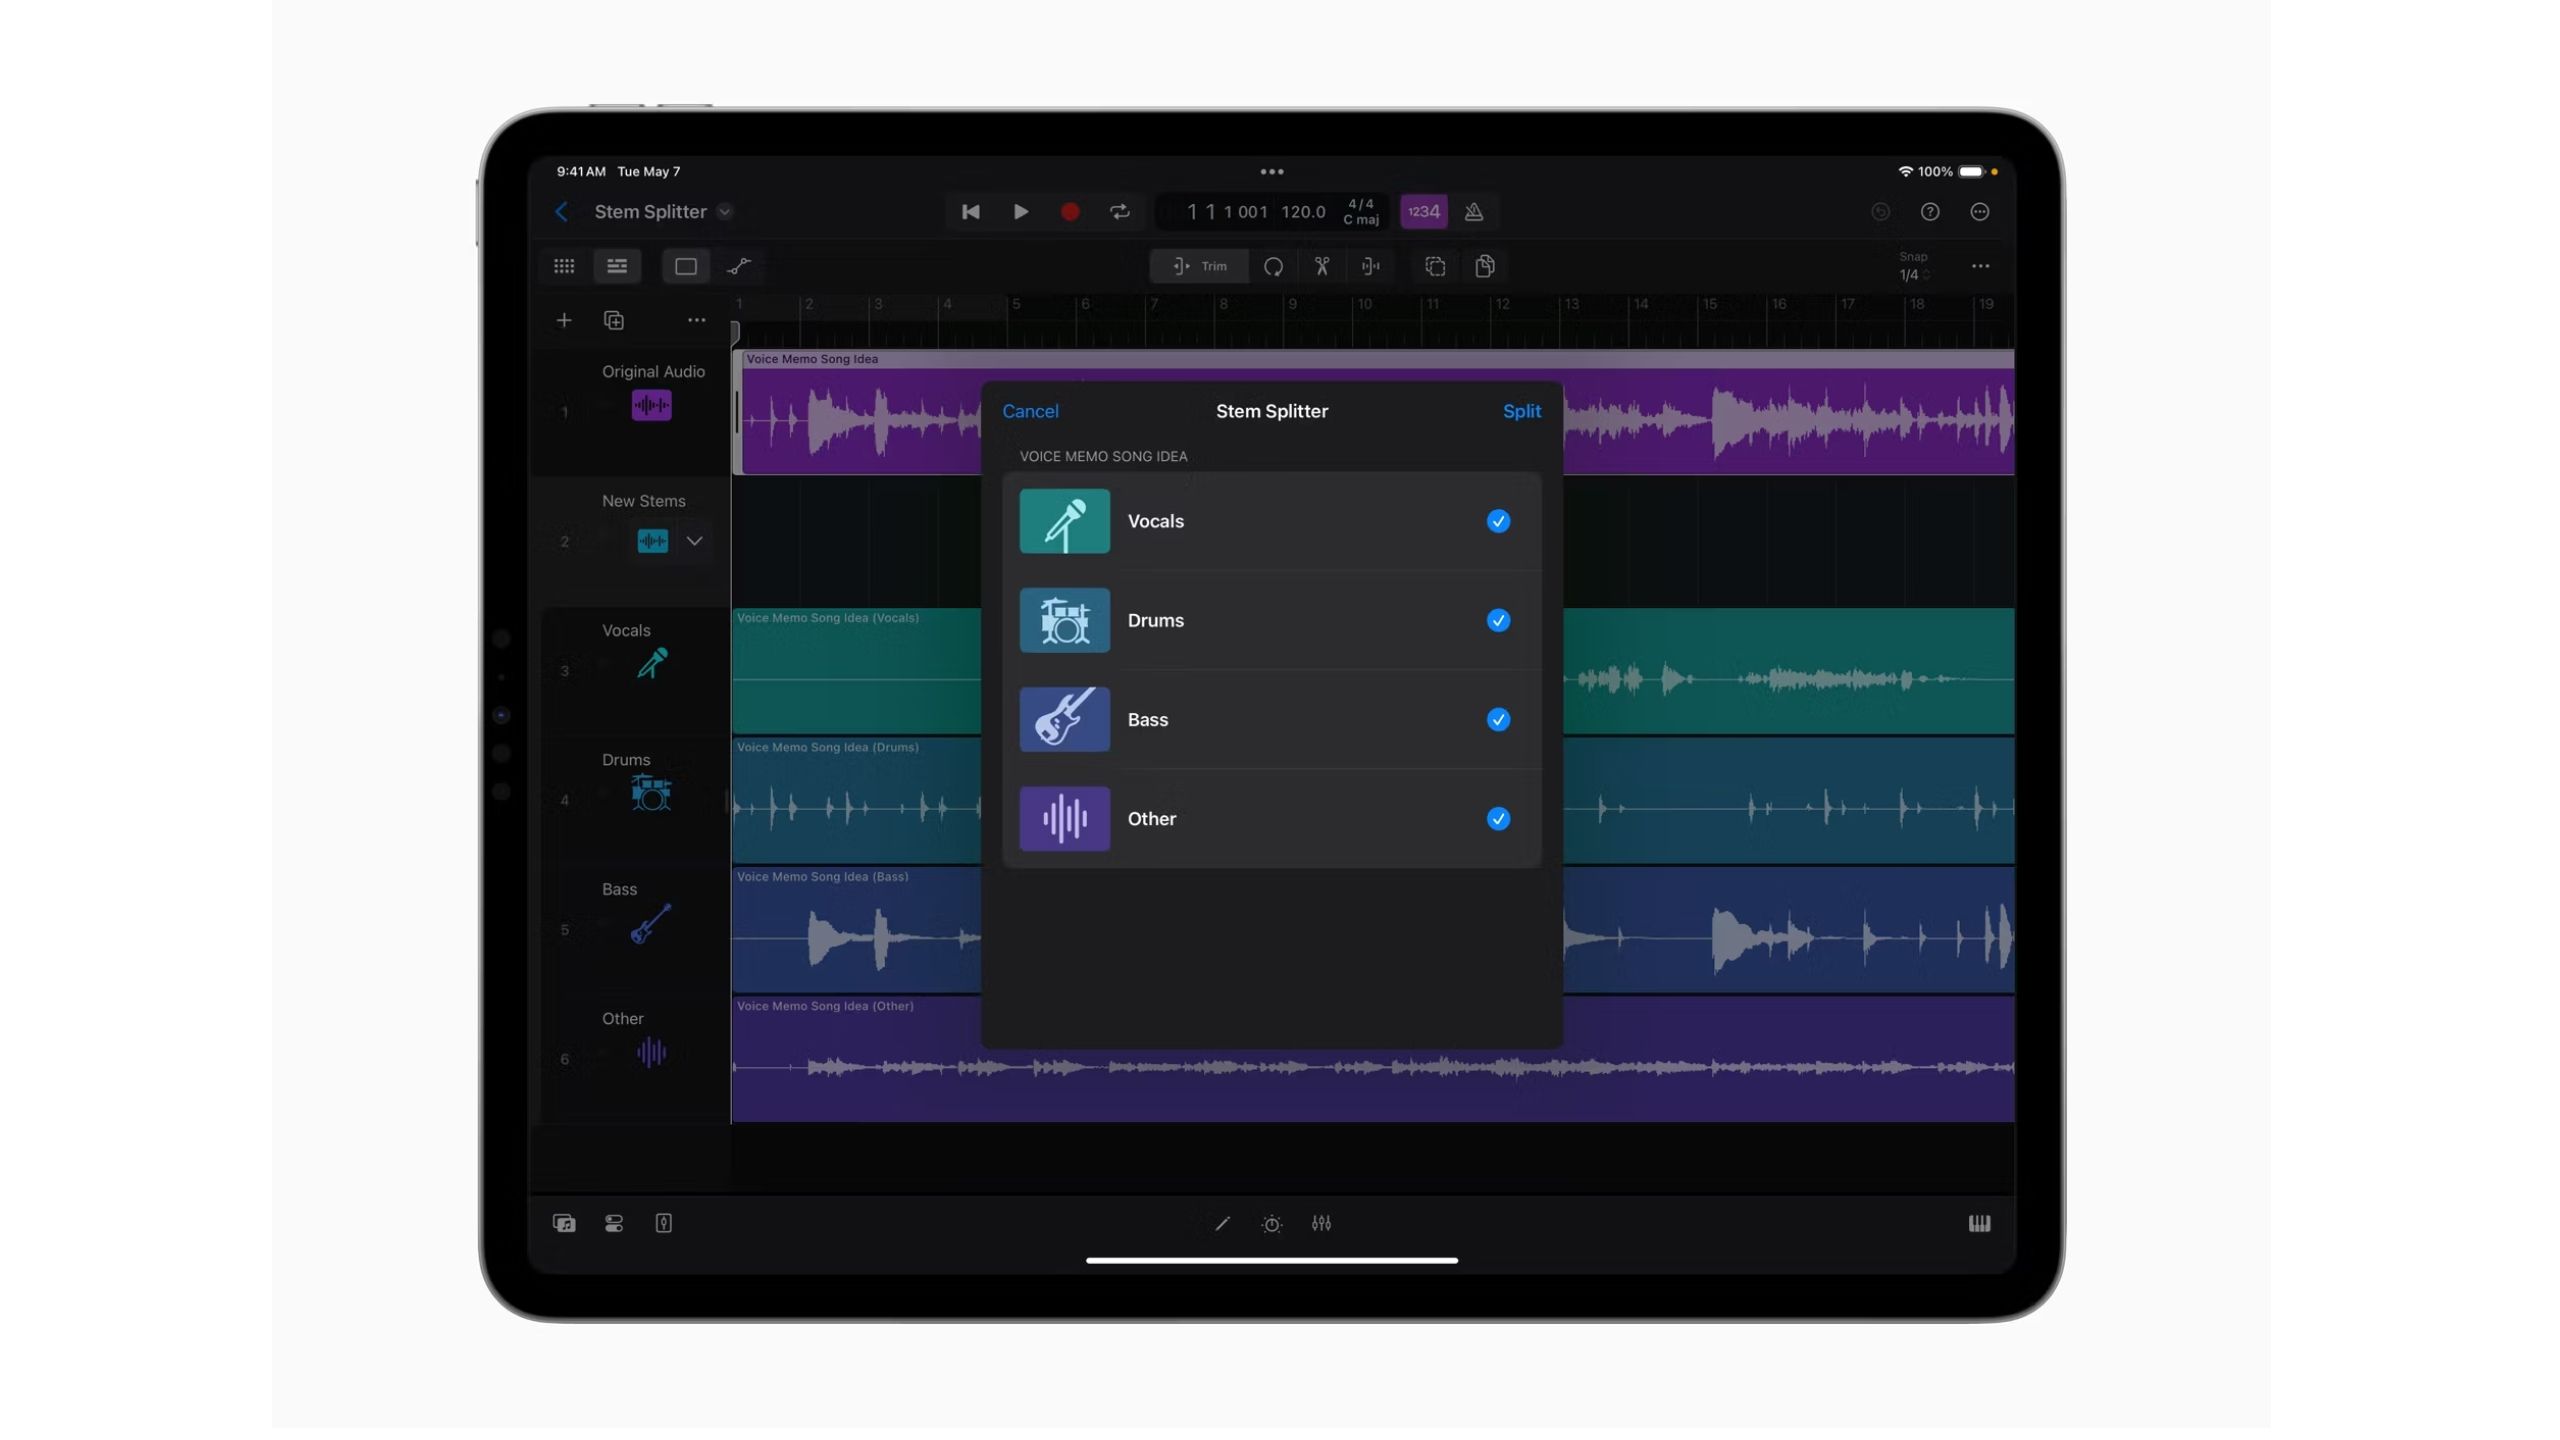 The stem splitter feature in Logic Pro for iPad 2.